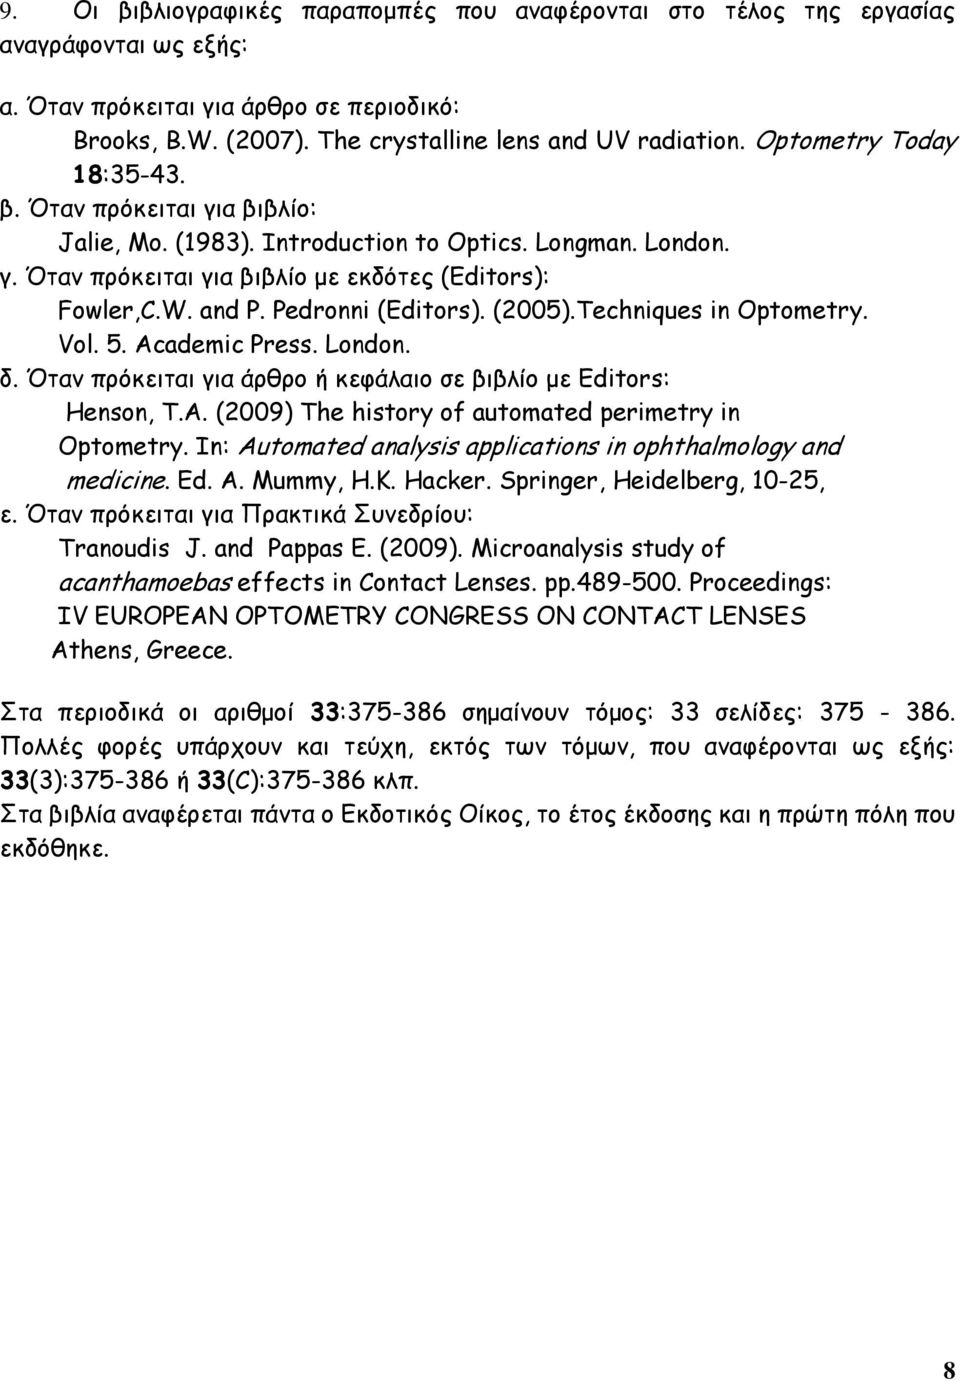 A. (2009) The history of automated perimetry in Optometry. In: Automated analysis applications in ophthalmology and medicine. Ed. A. Mummy, H.K. Hacker. Springer, Heidelberg, 10-25,.